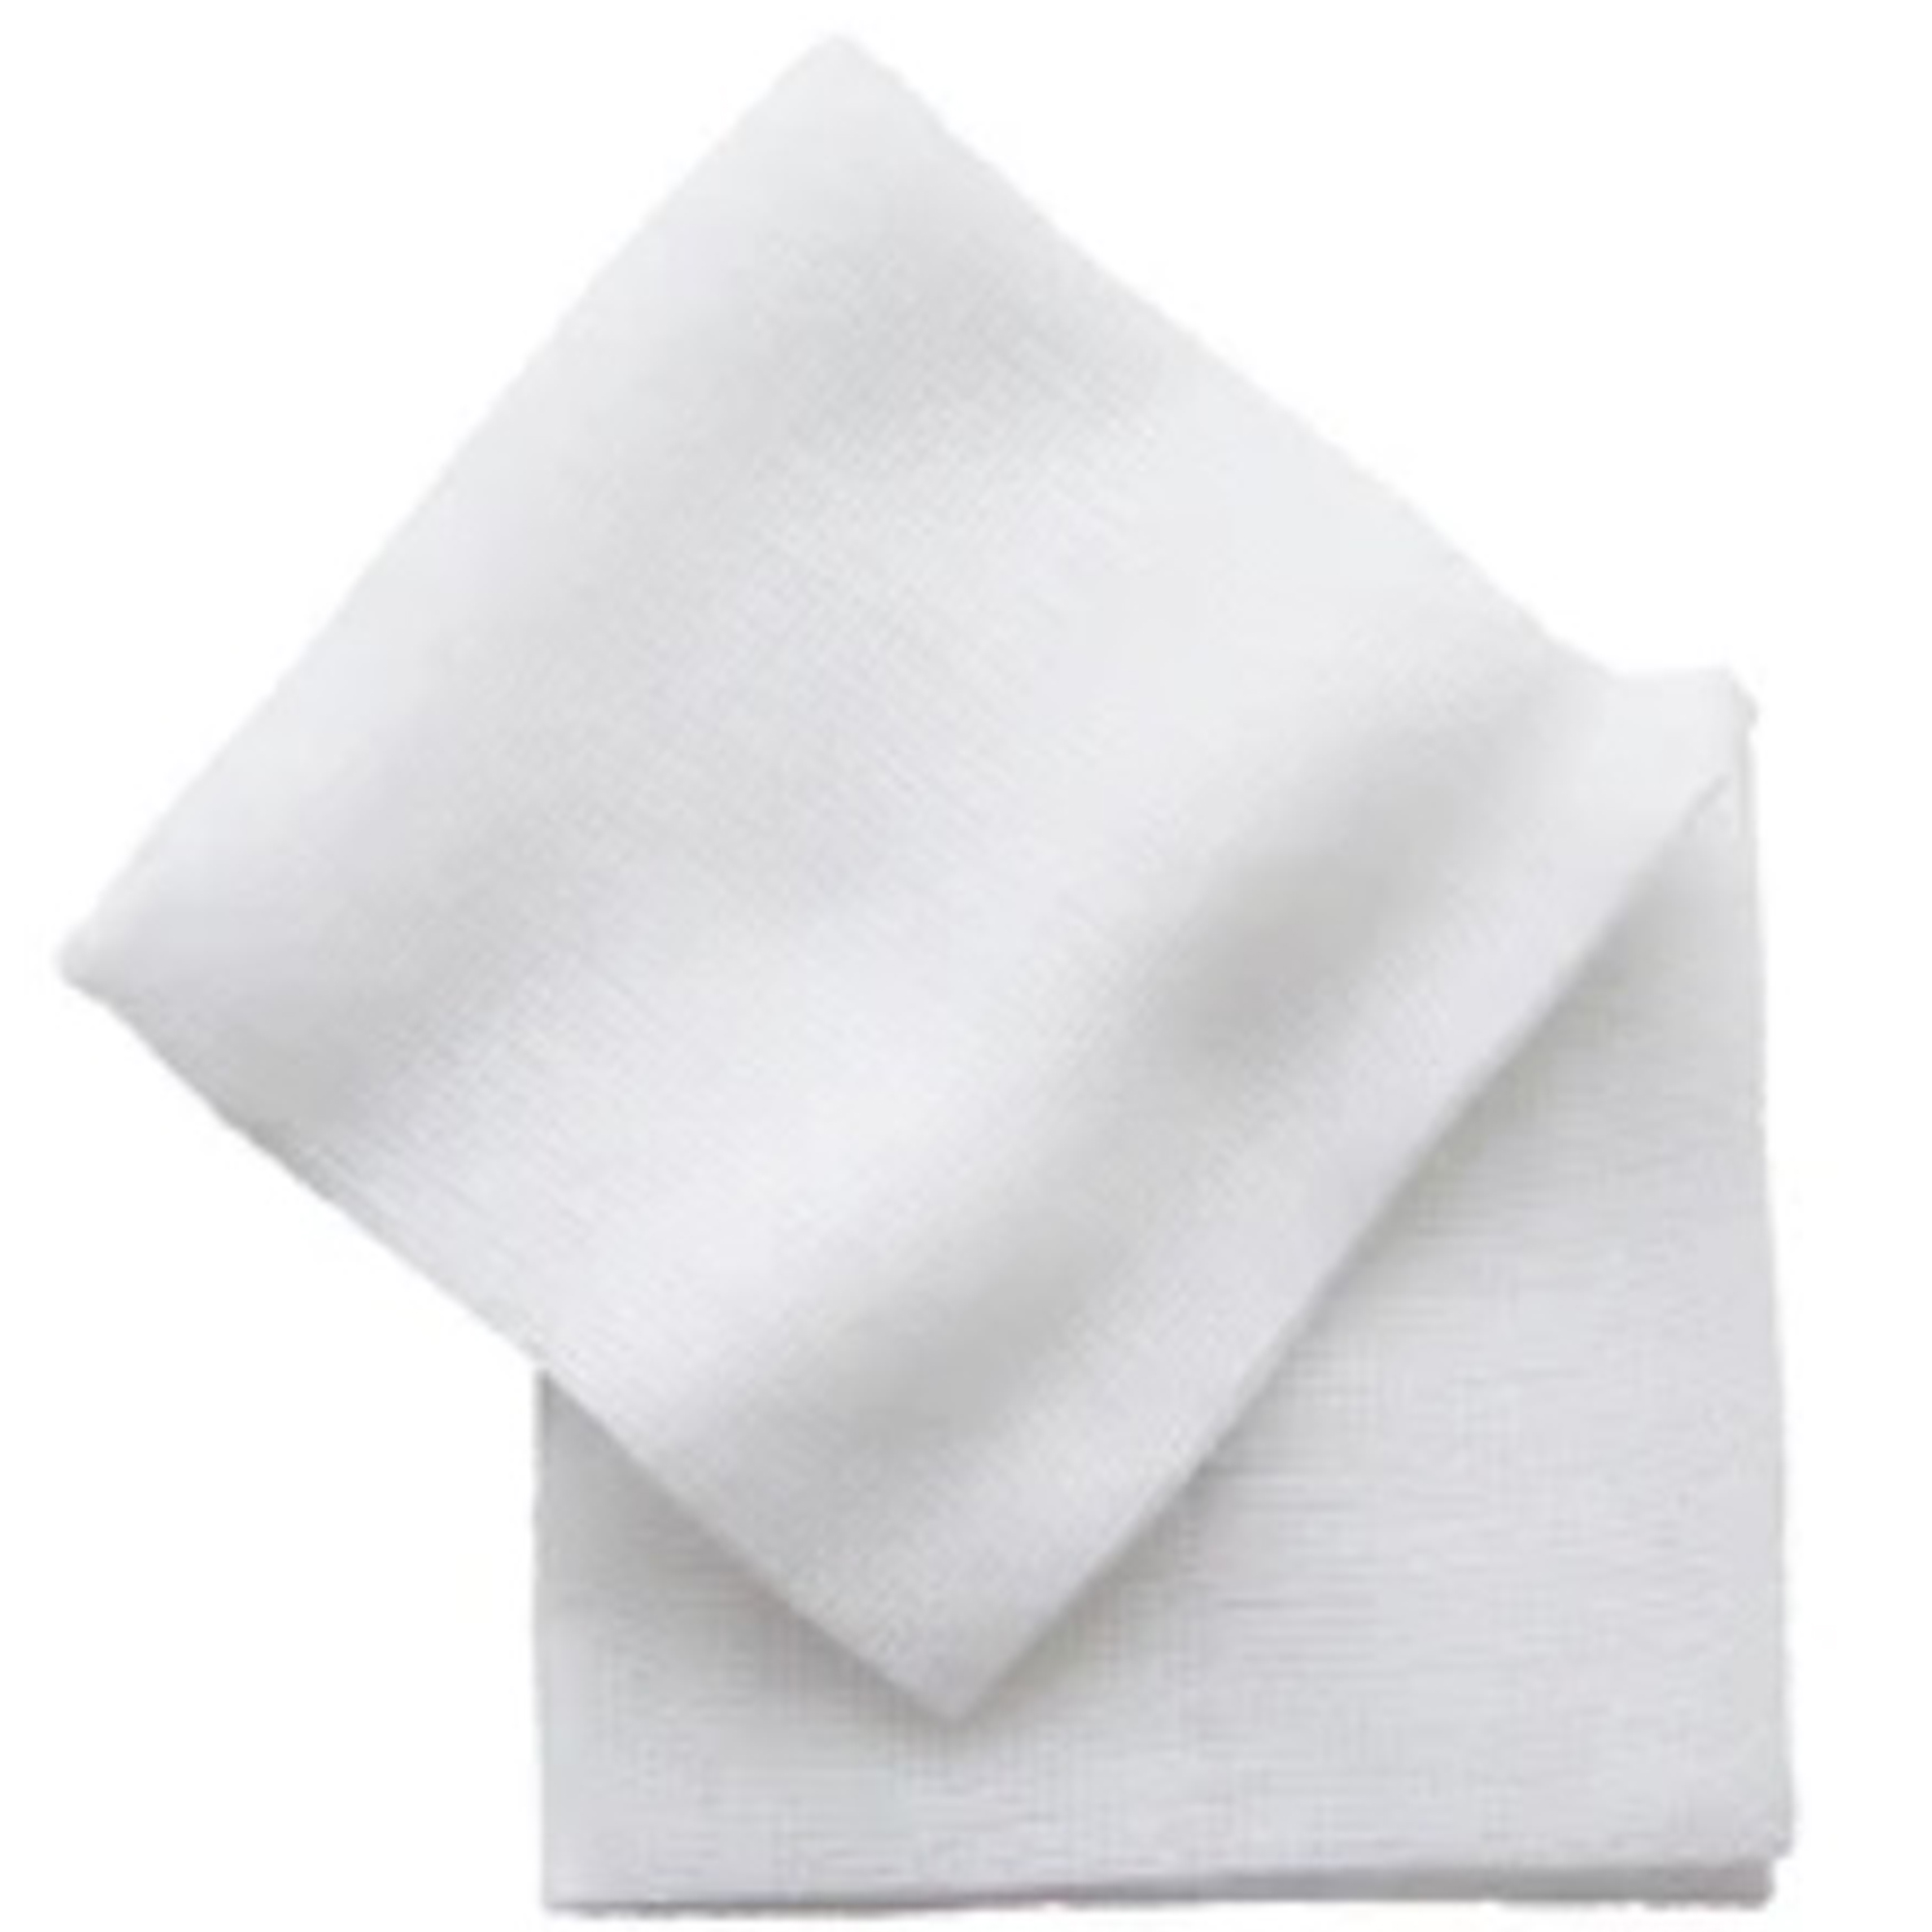 Cosmetic SPA/COSMETIC GAUZE SWABS, BANDAGES/Cosmetic Non-woven Gauze Swabs & Alcohol pads